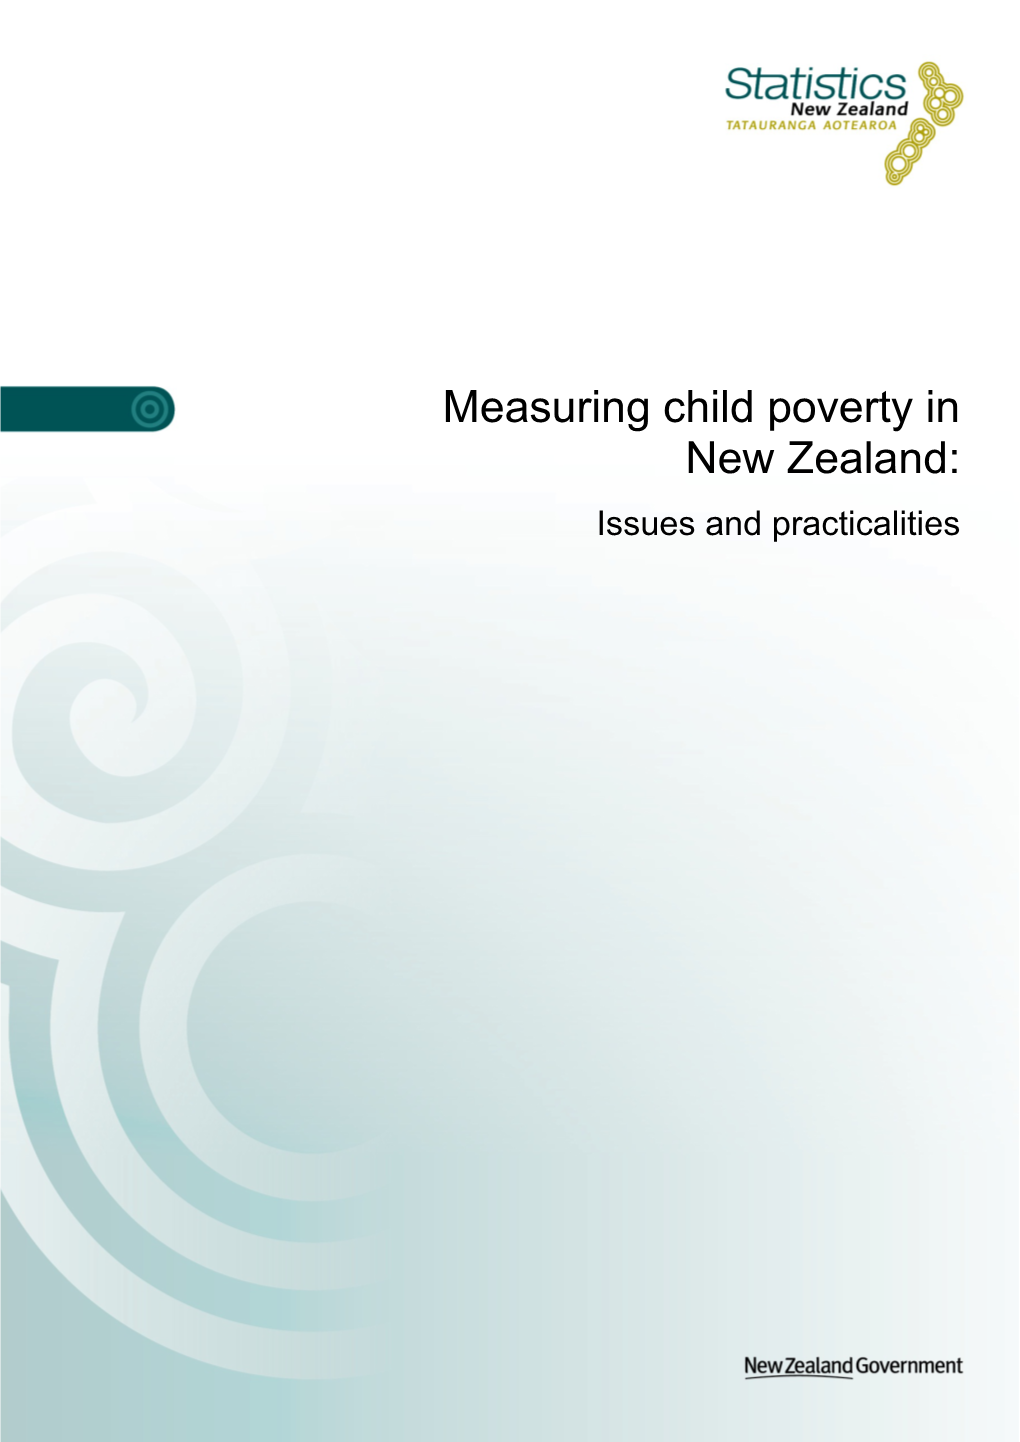 Measuring Child Poverty in New Zealand: Issues and Practicalities